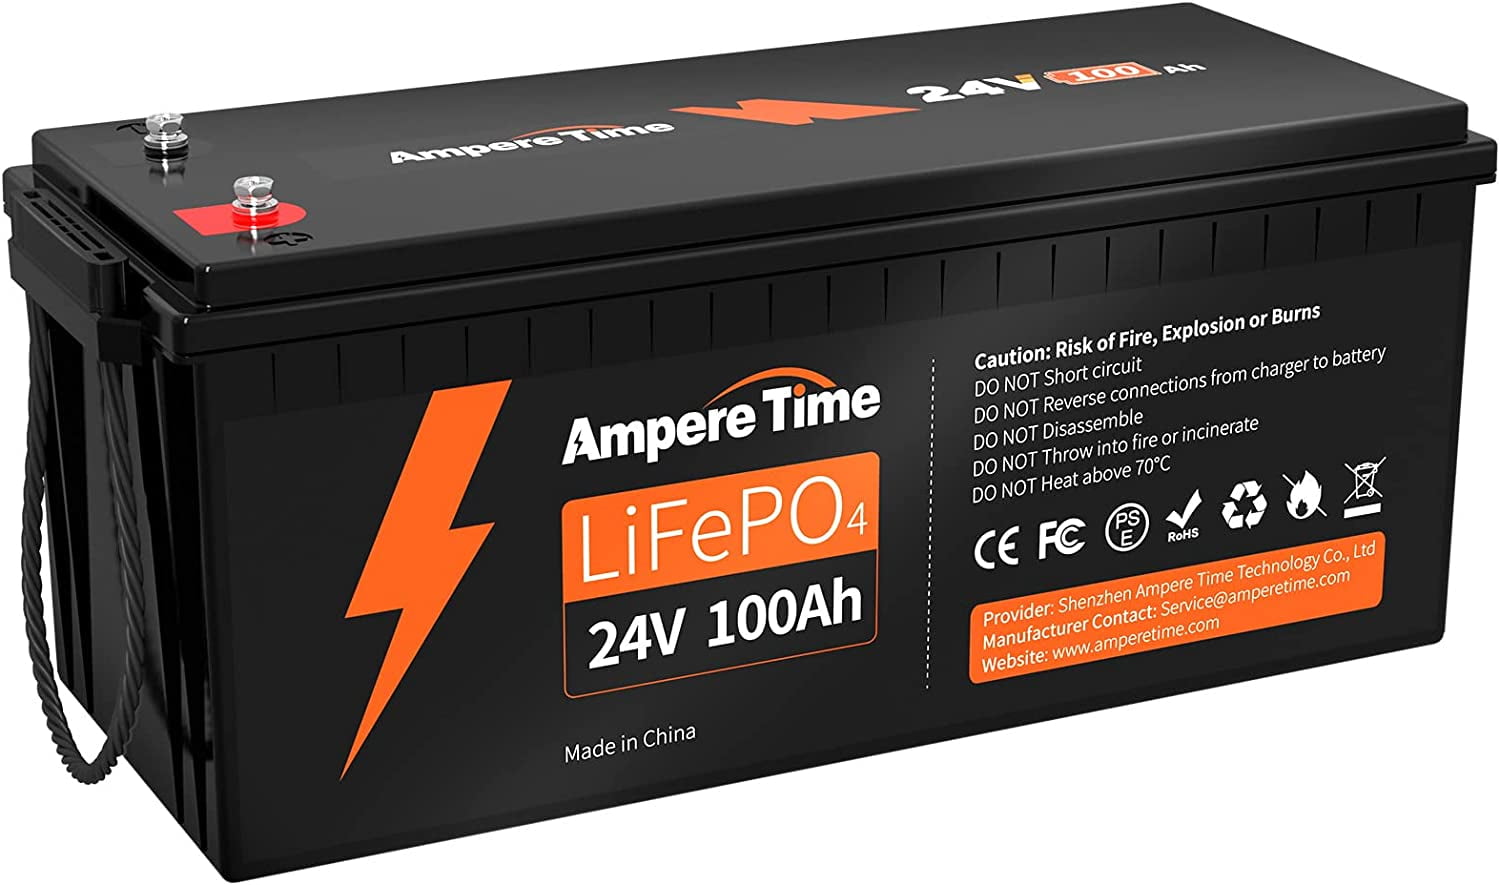 Ampere Time 24V 100Ah LiFePO4 4000+ Cycle with 100 For RV, Marine, Overland/Van, Applications - Walmart.com